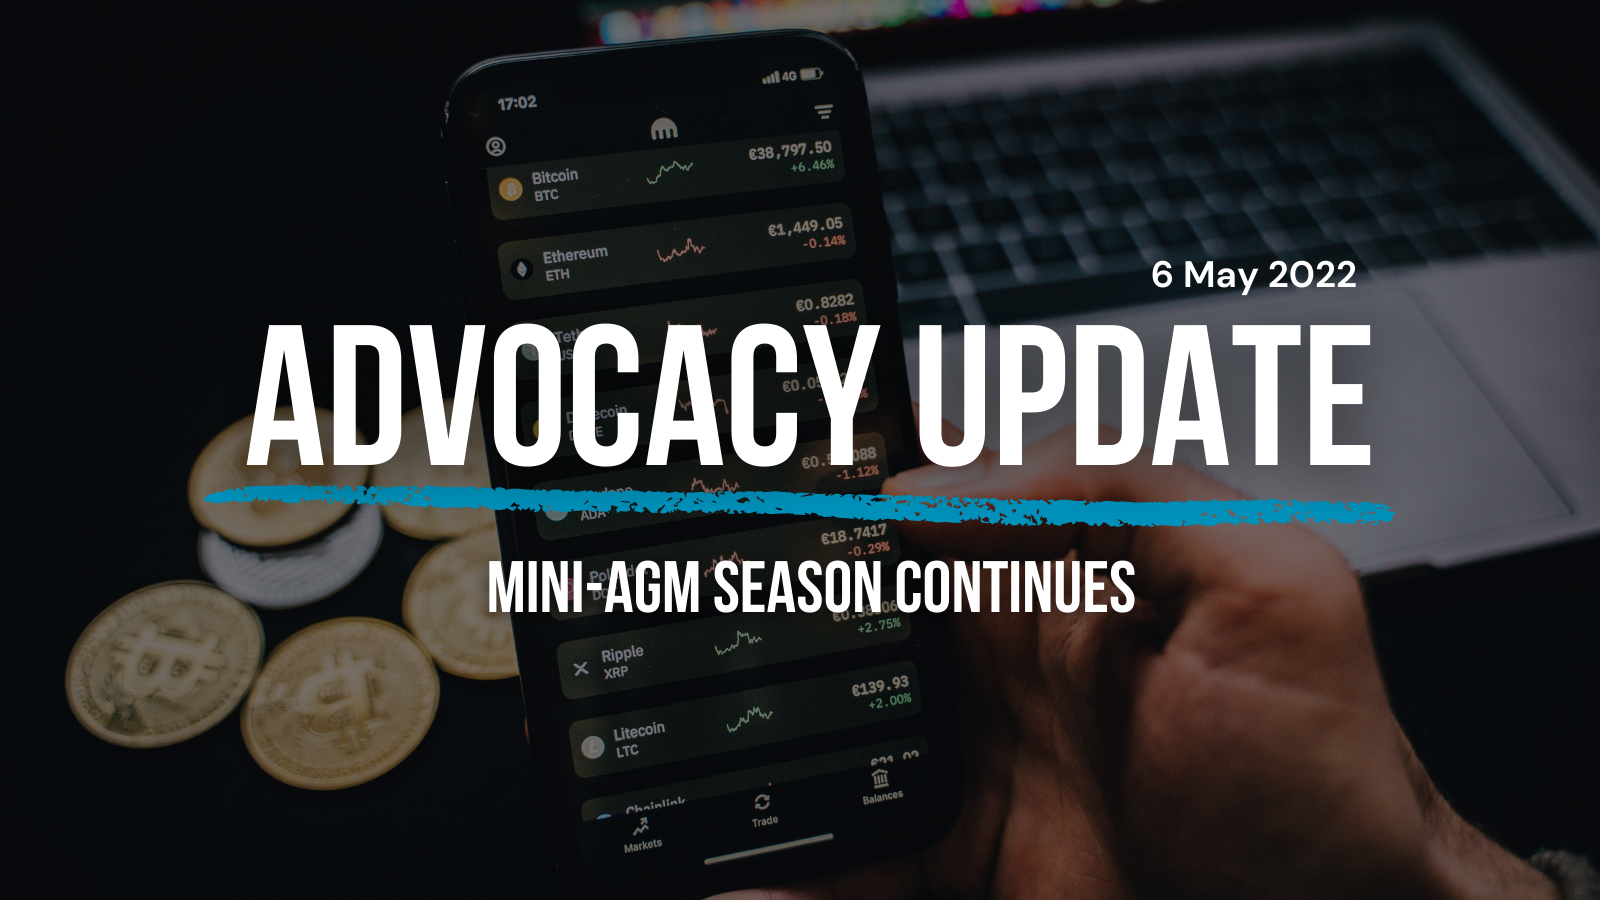 76. advocacy update - 6 may 2022